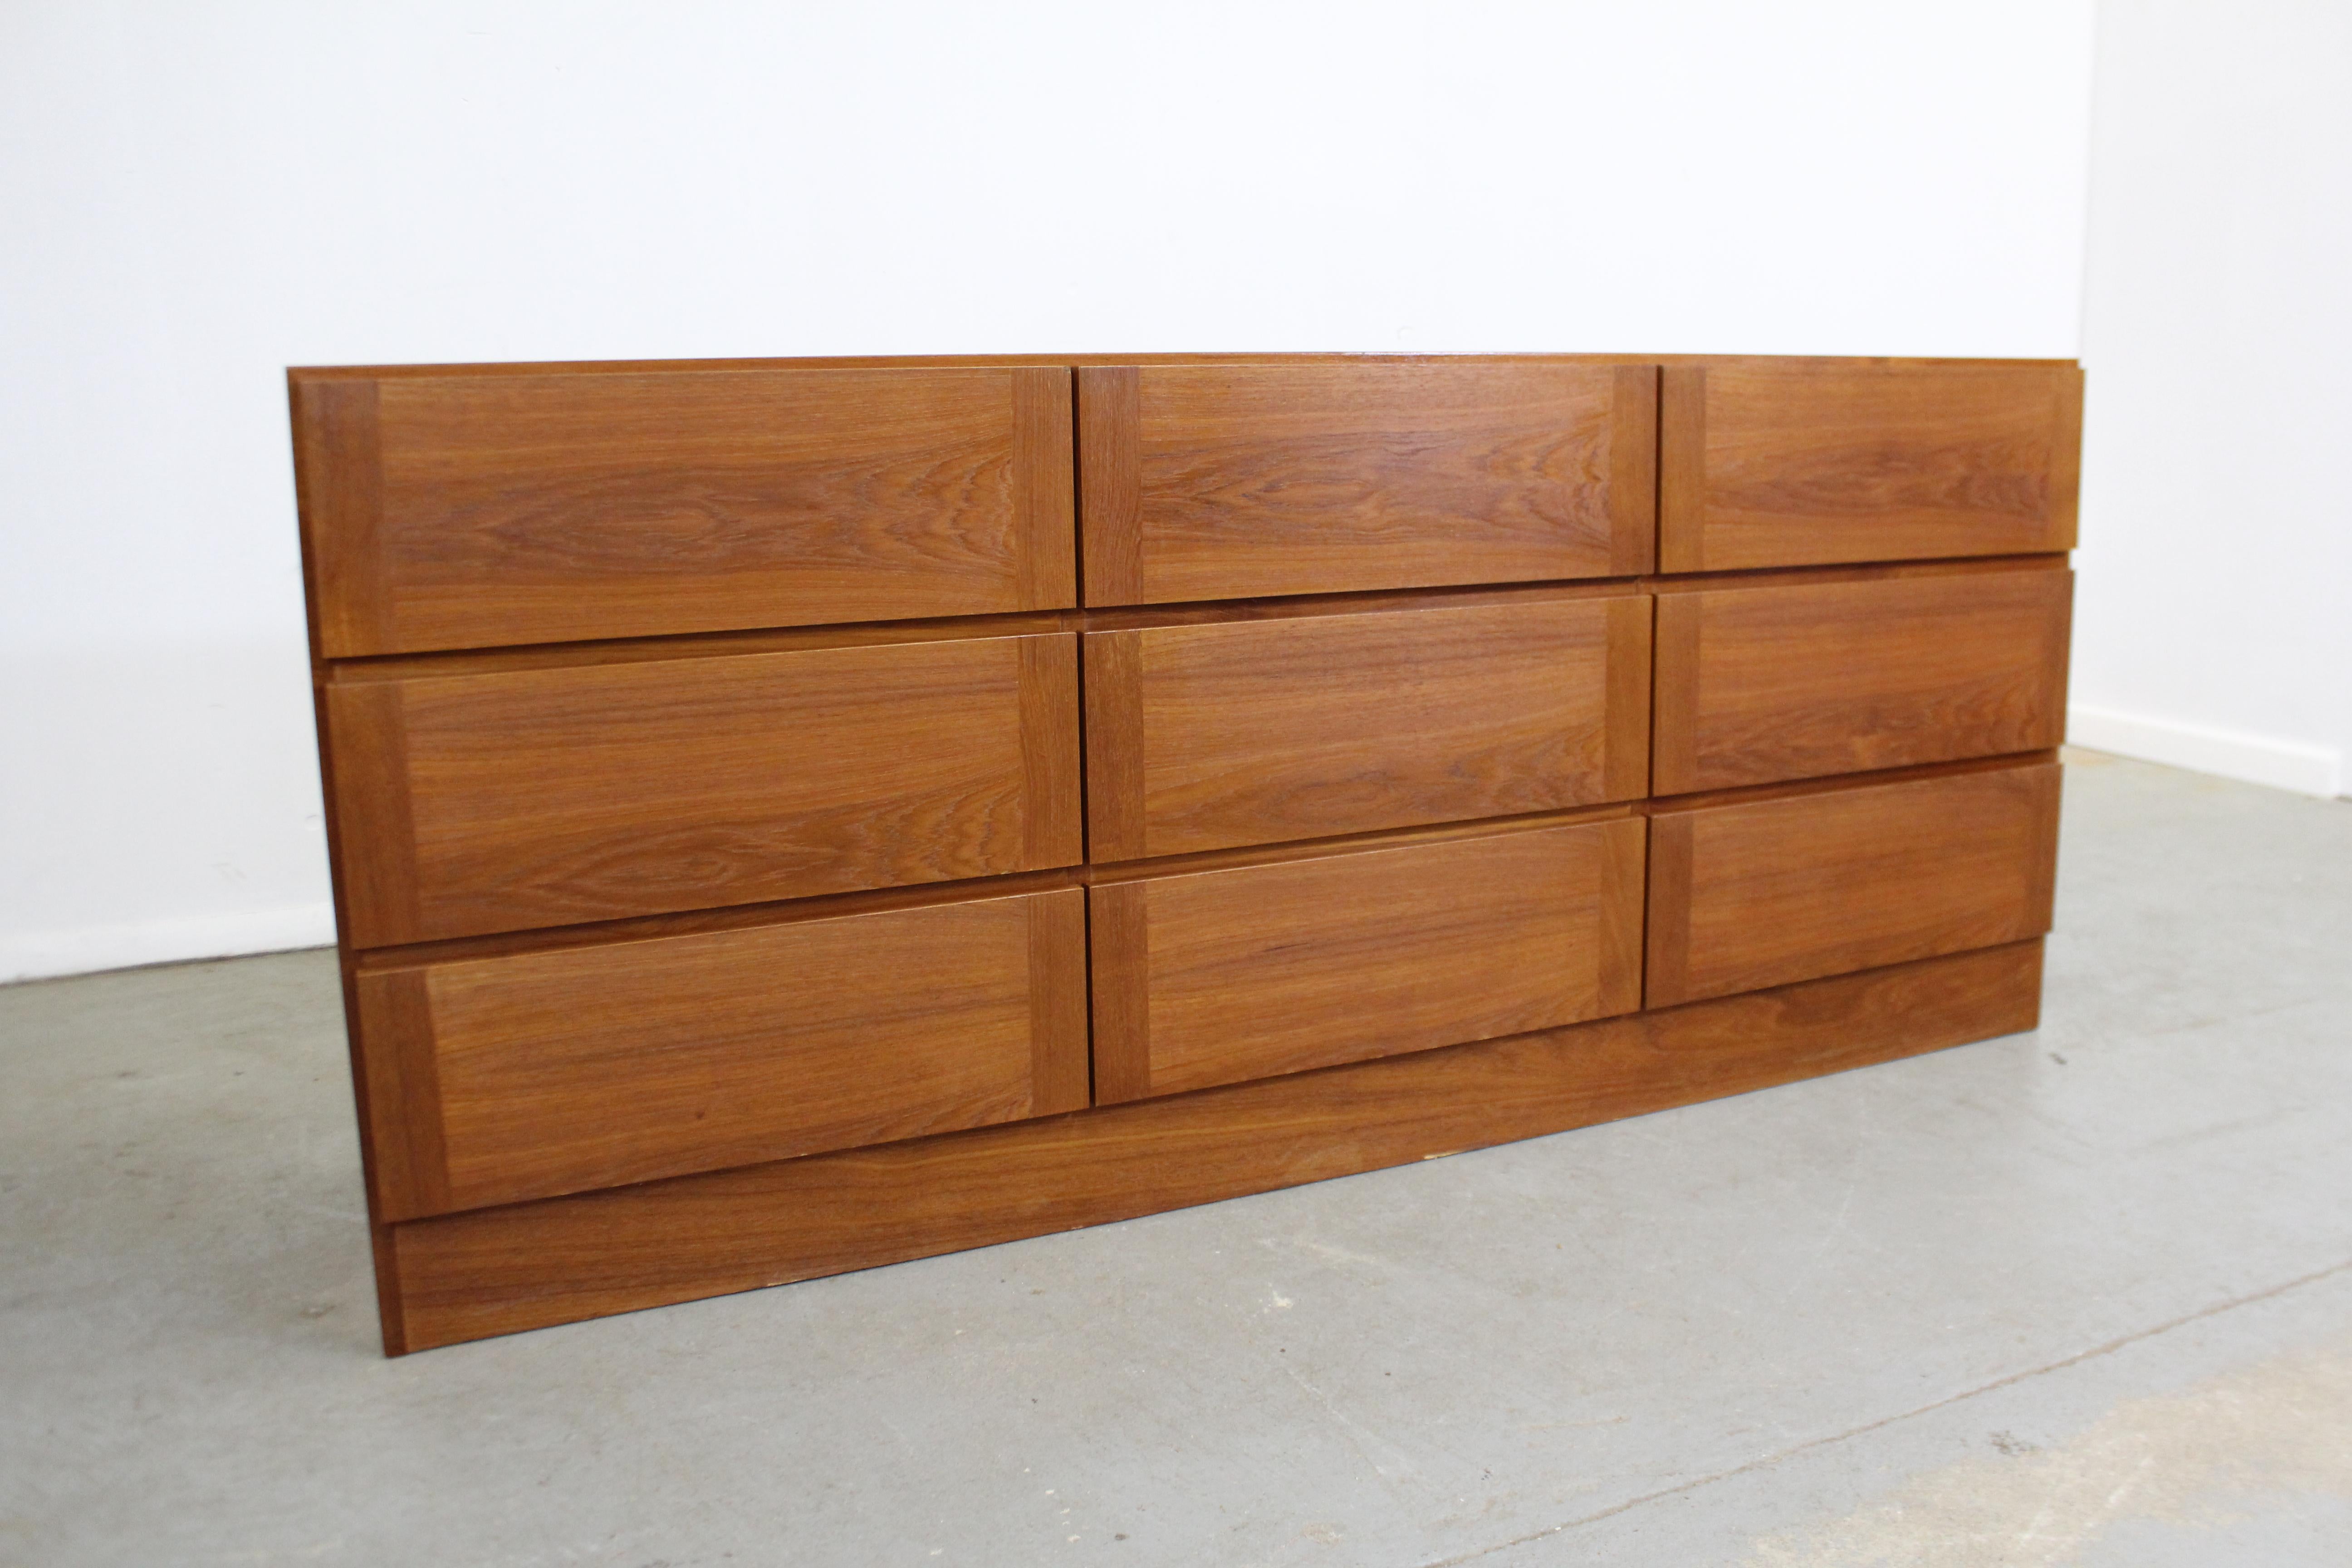 Offered is a Danish modern gentleman's chest by Vinde Mobelfabrik. It is made of teak, featuring nine drawers that all open smoothly (not dovetailed). In good vintage condition with some surface scratches, water stain on top and general age wear. It